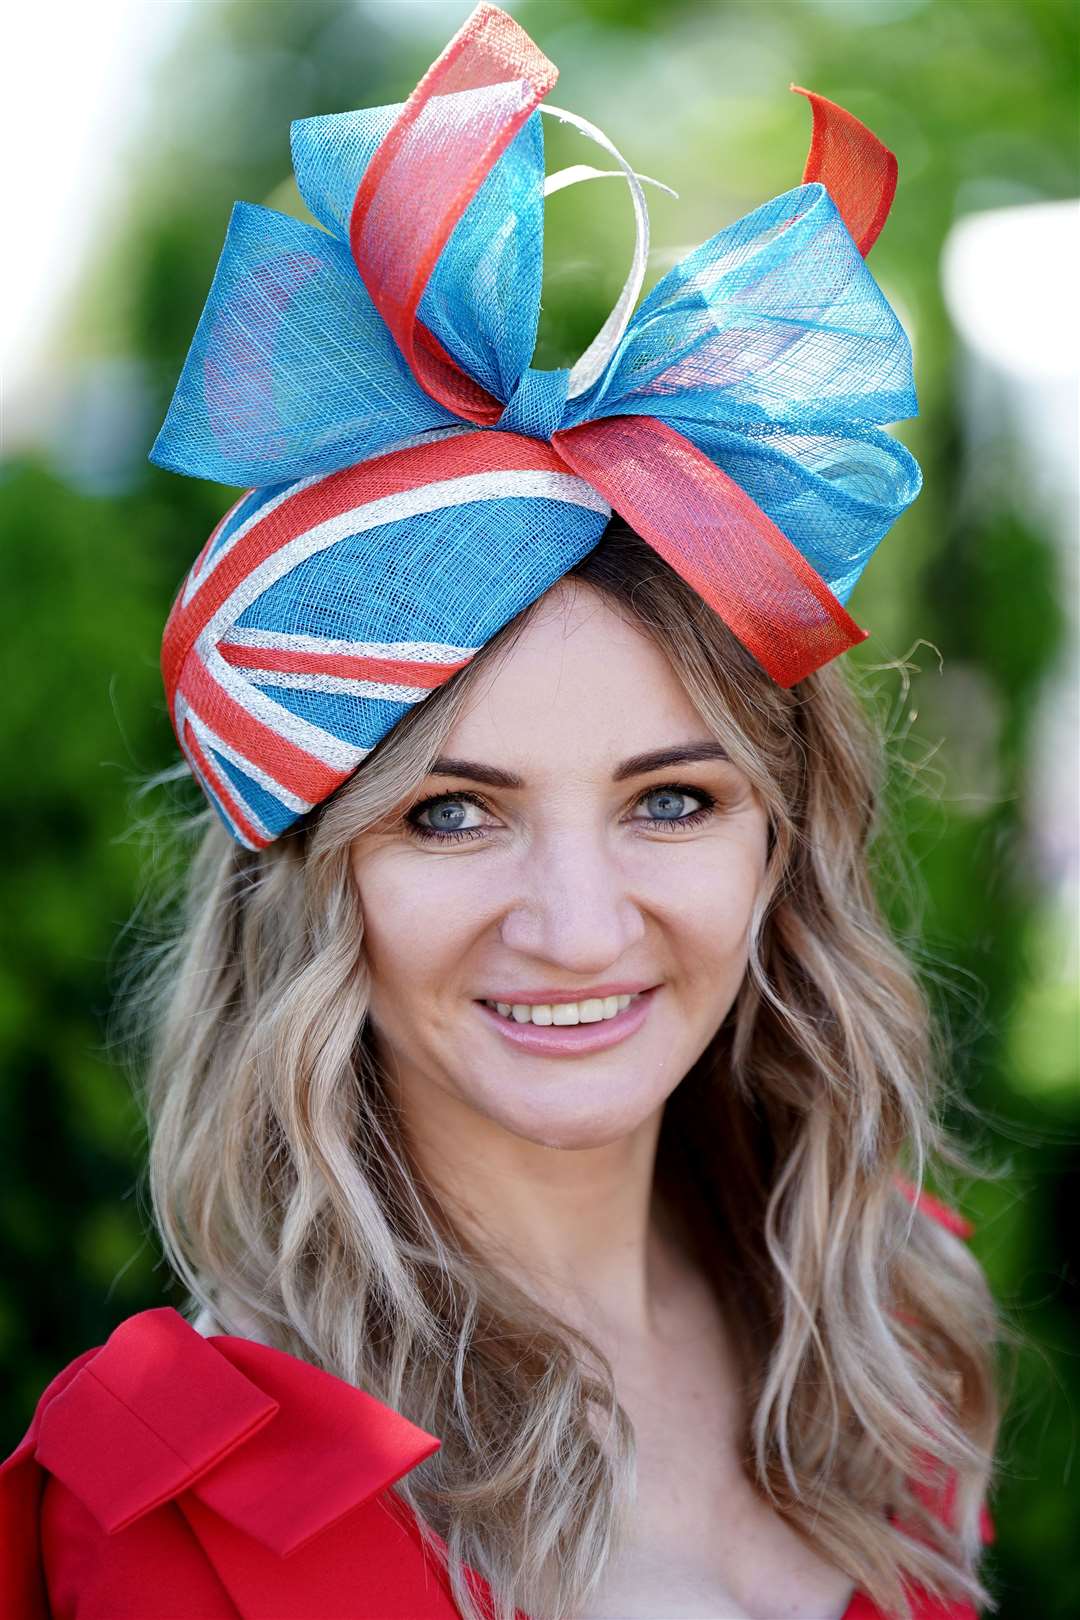 Red, white and blue hats proved popular at Royal Ascot (Aaron Chown/PA)